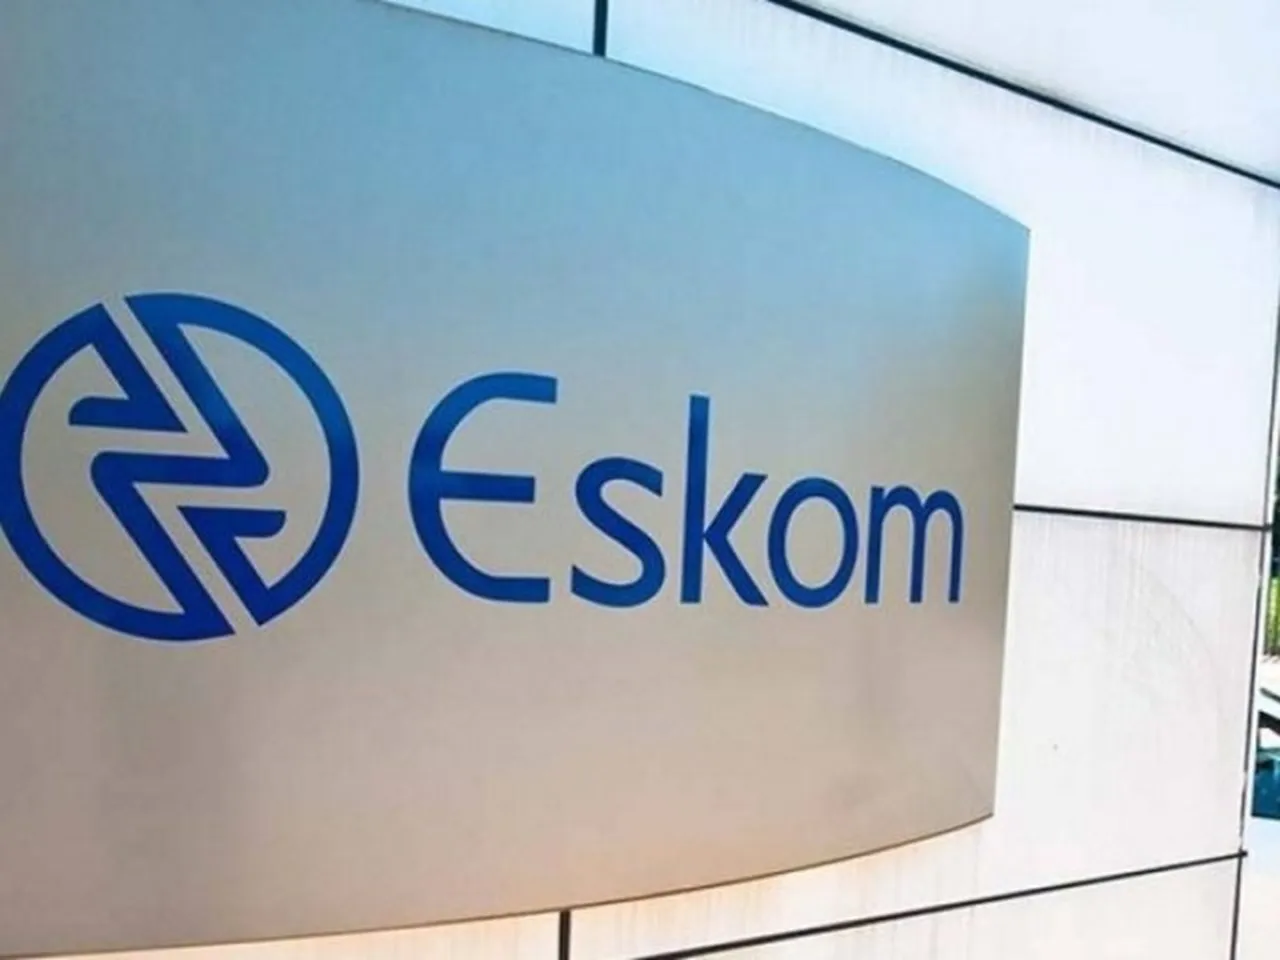 Eskom: SA may face power cuts of up to 32 hours